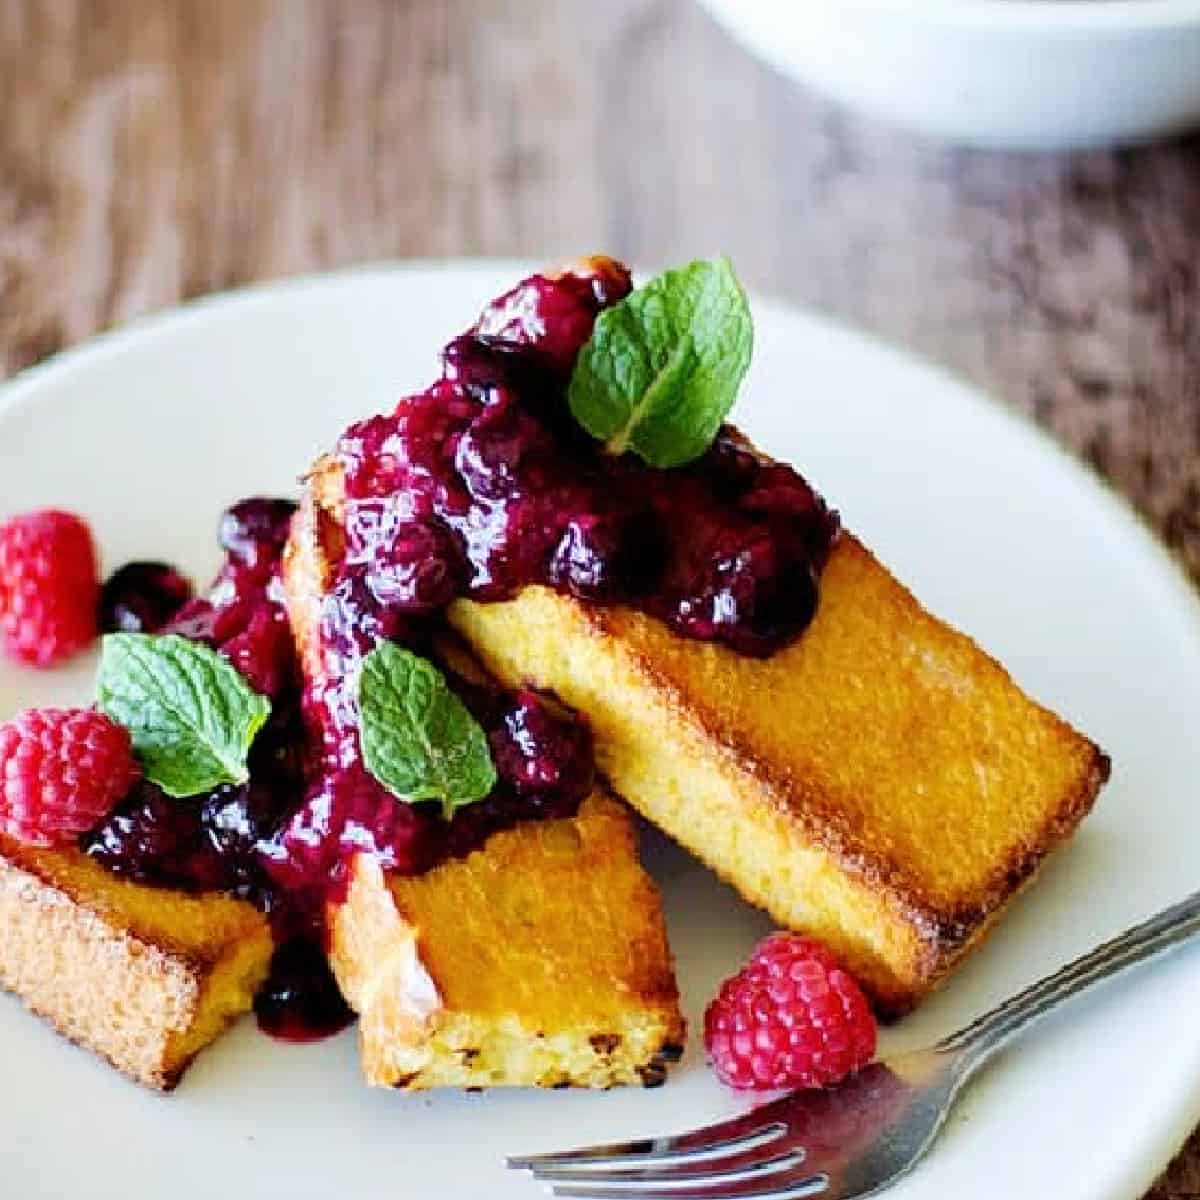 This baked French toast with Berry compote, which is homemade, is all you need for a Sunday morning! Save time and energy by baking These French toasts in the oven!
